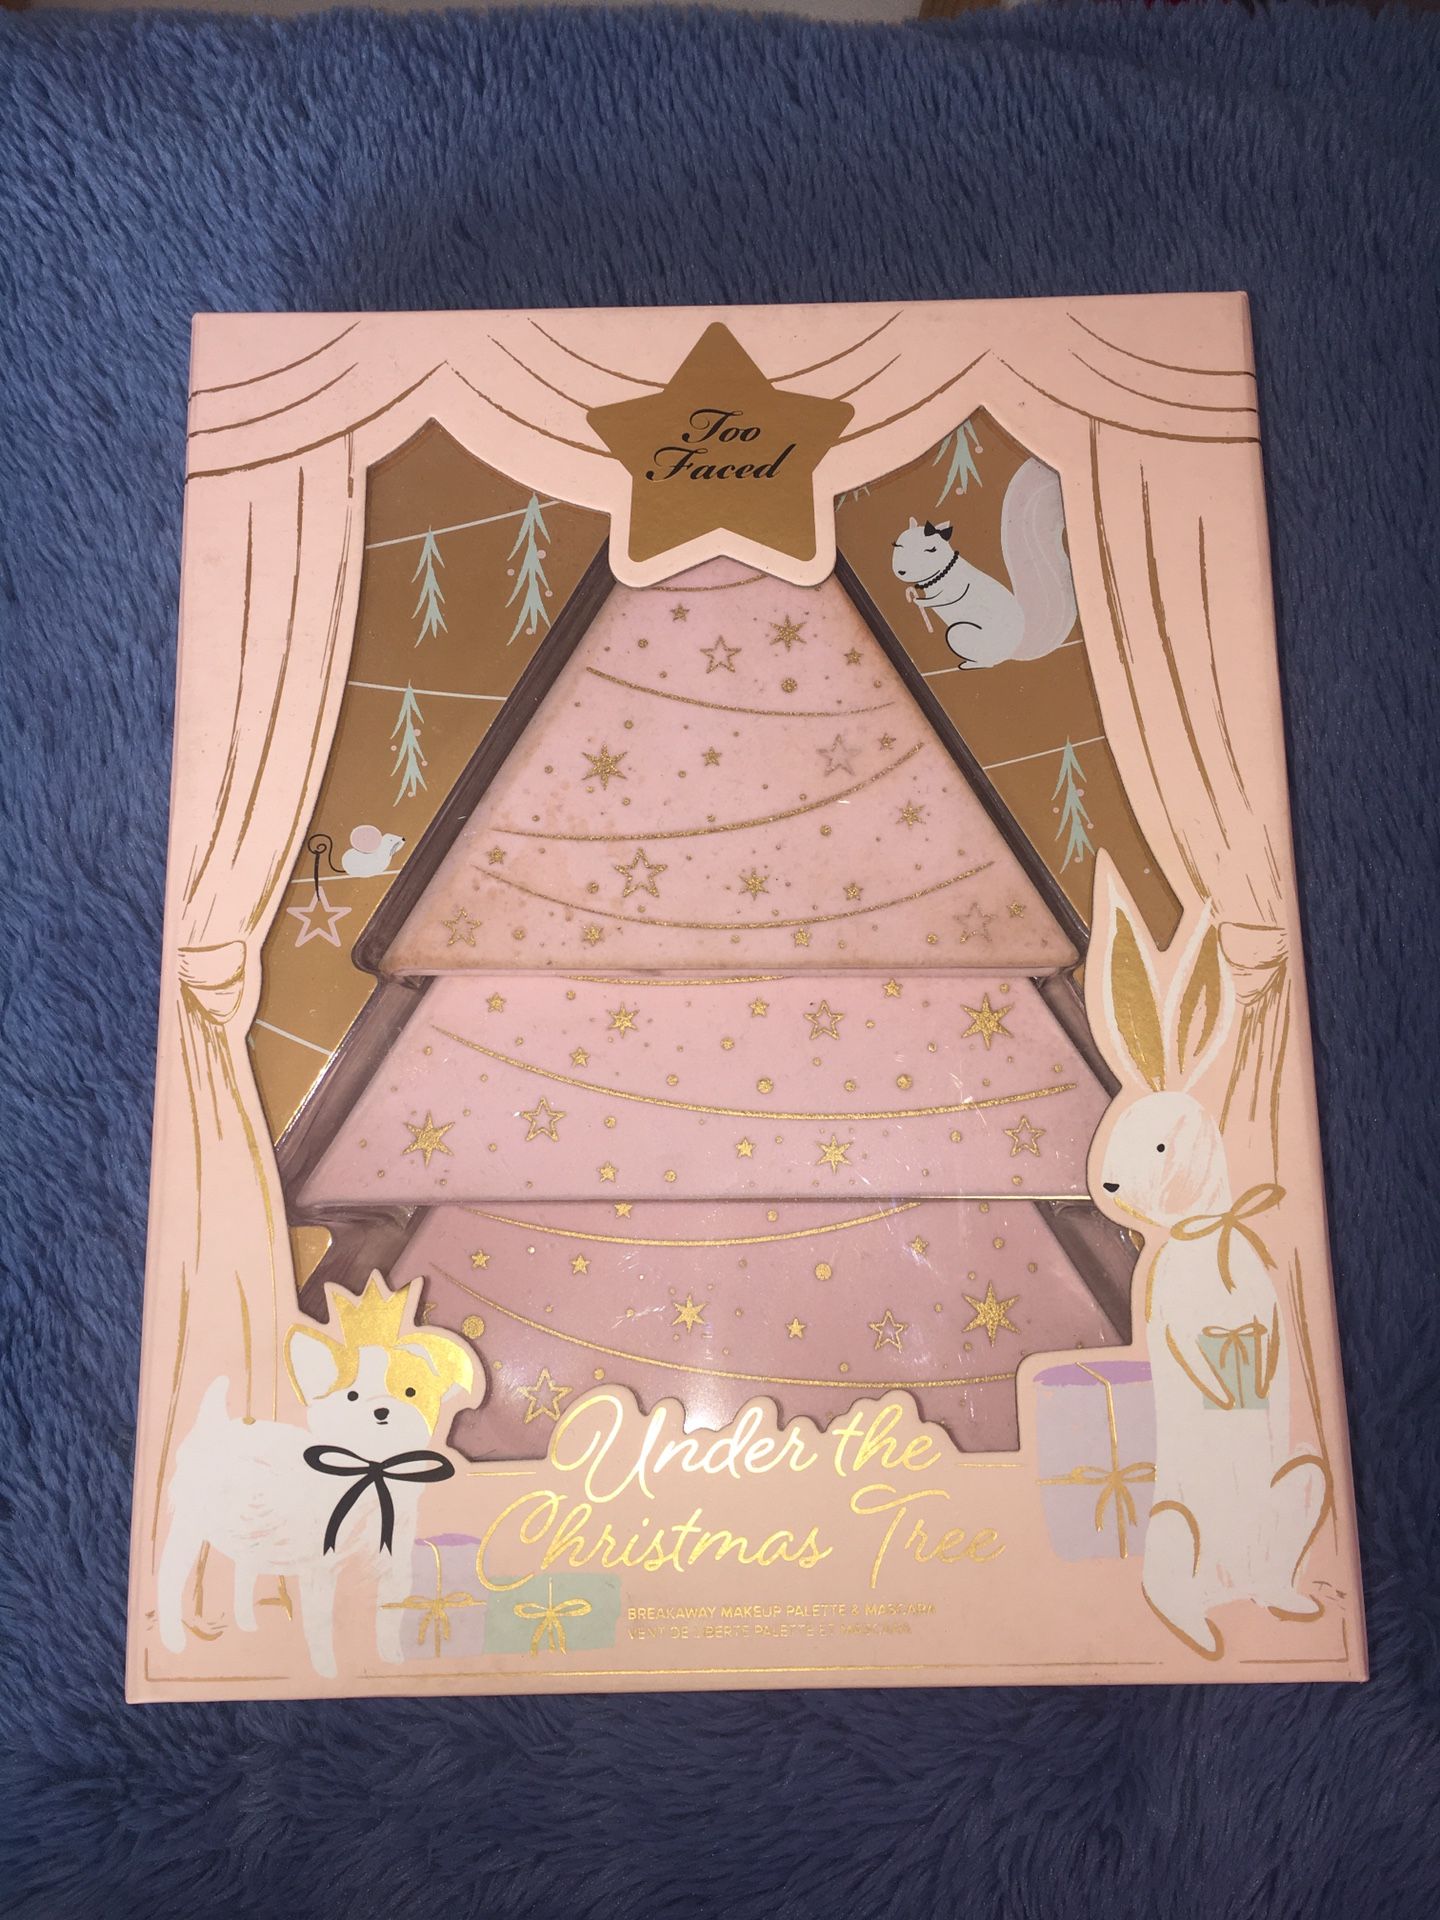 Too Faced Under the Christmas Tree Breakaway makeup palettes